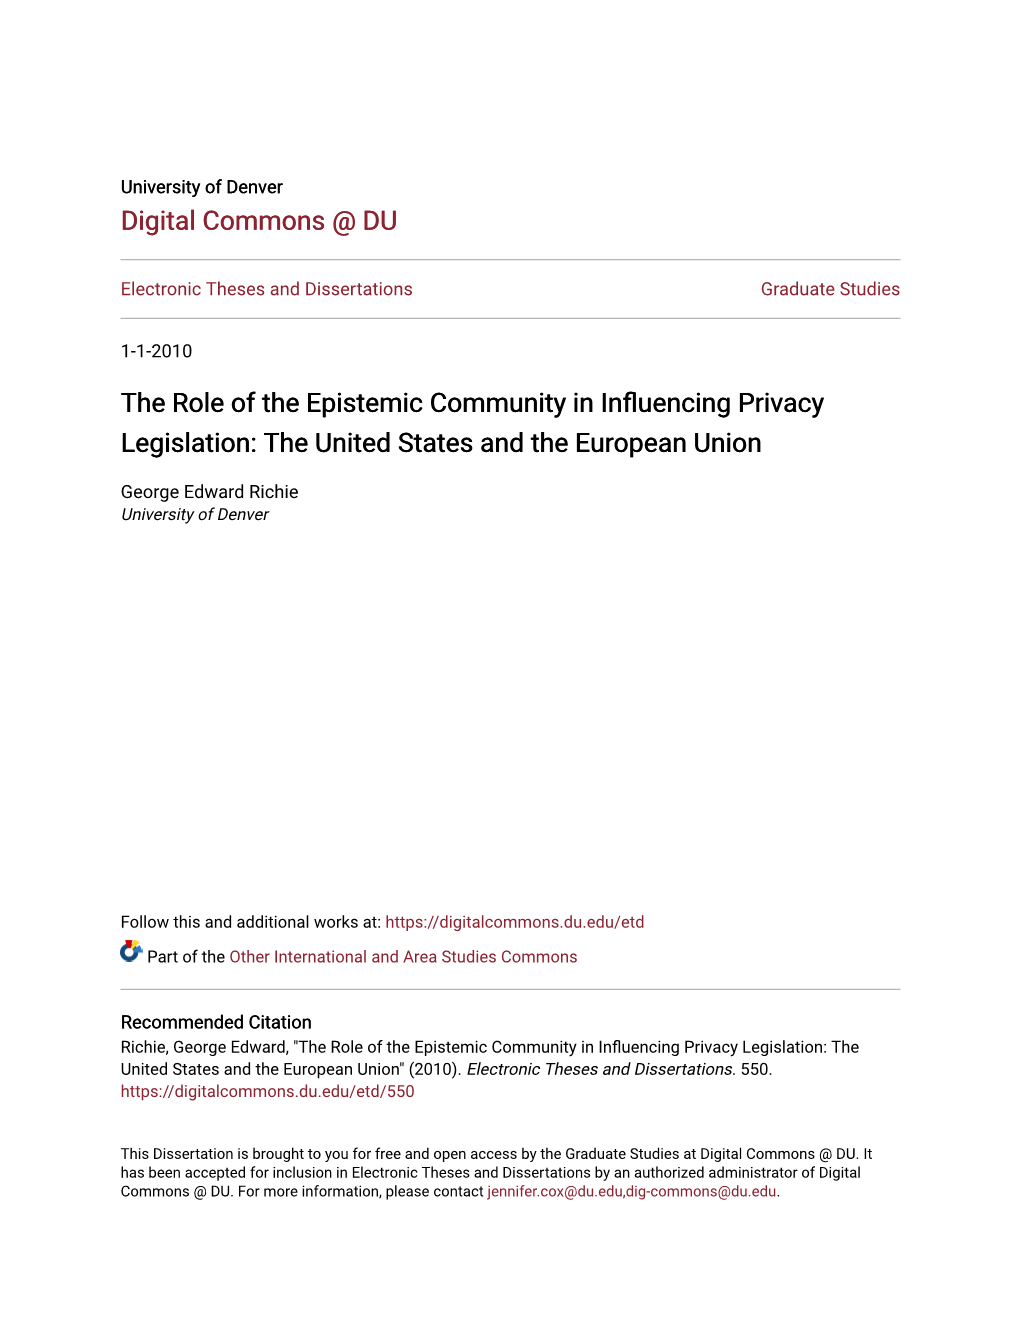 The Role of the Epistemic Community in Influencing Privacy Legislation: the United States and the European Union